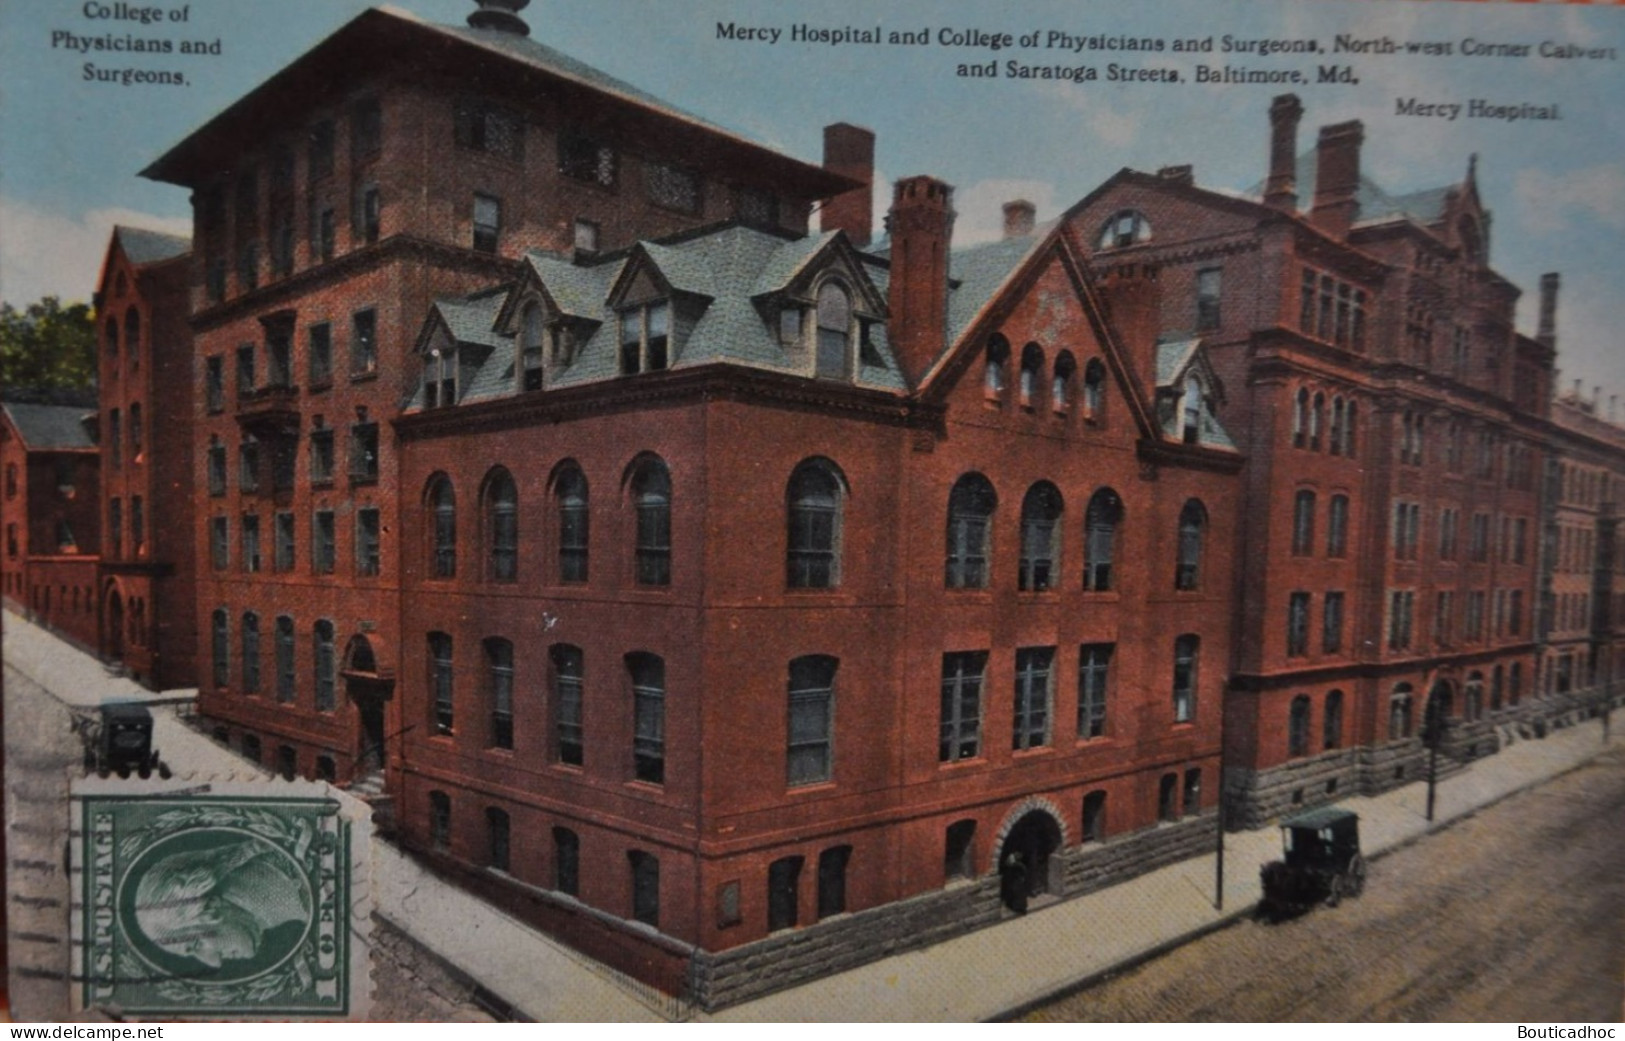 Mercy Hospital In Saratoga Street In Baltimore (1914) - Baltimore